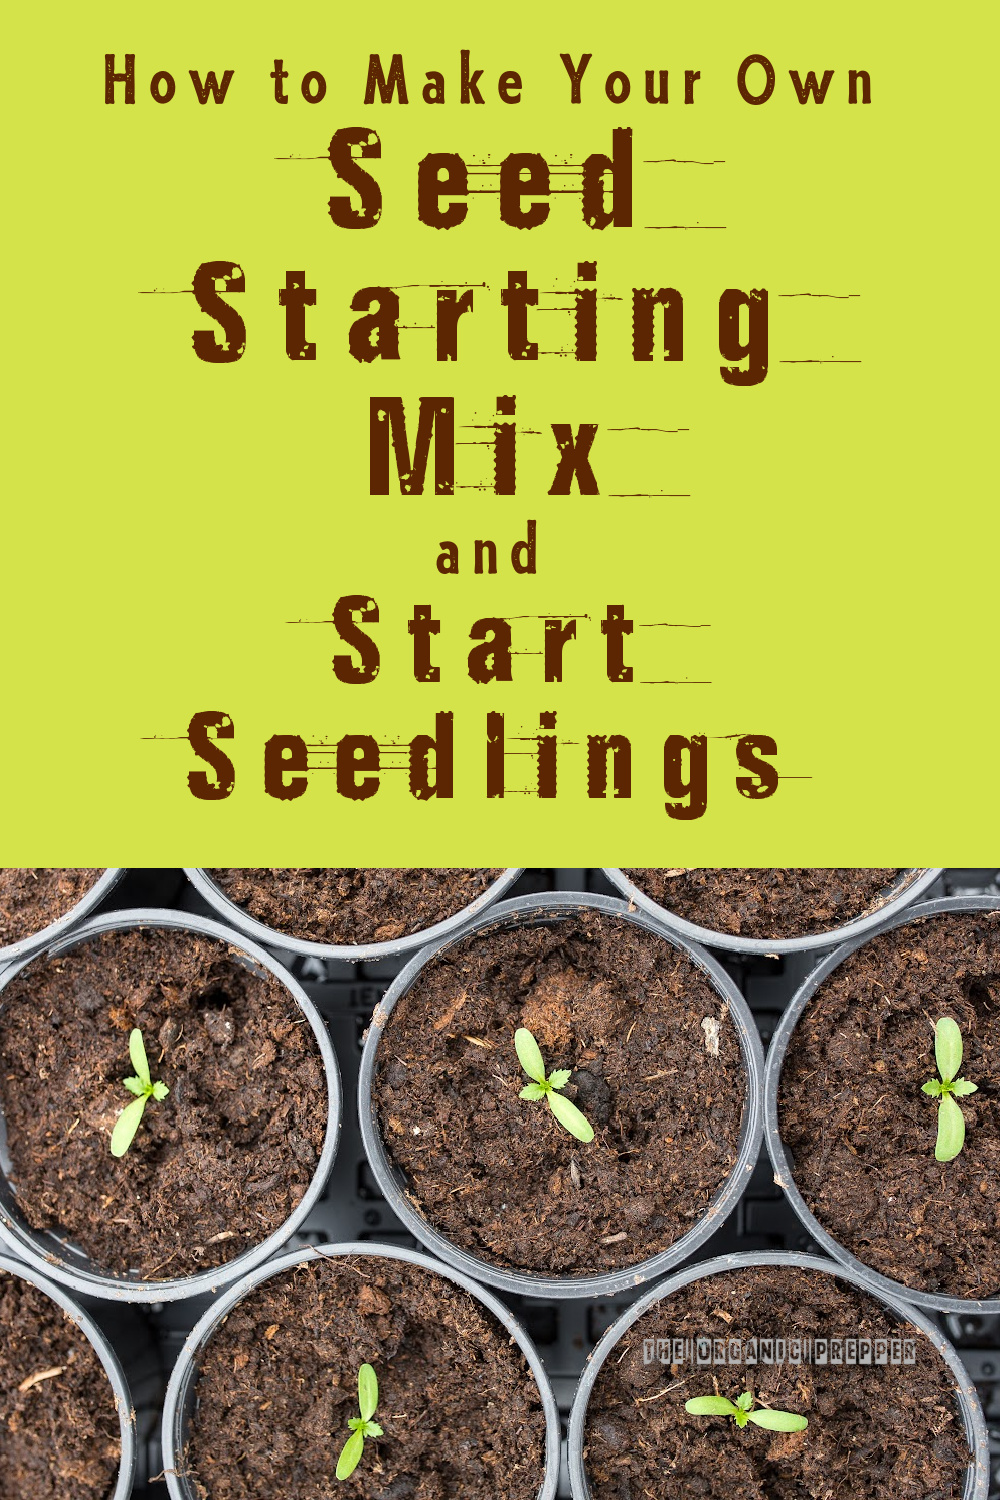 How to Make Your Own Seed Starting Mix and Start Seedlings